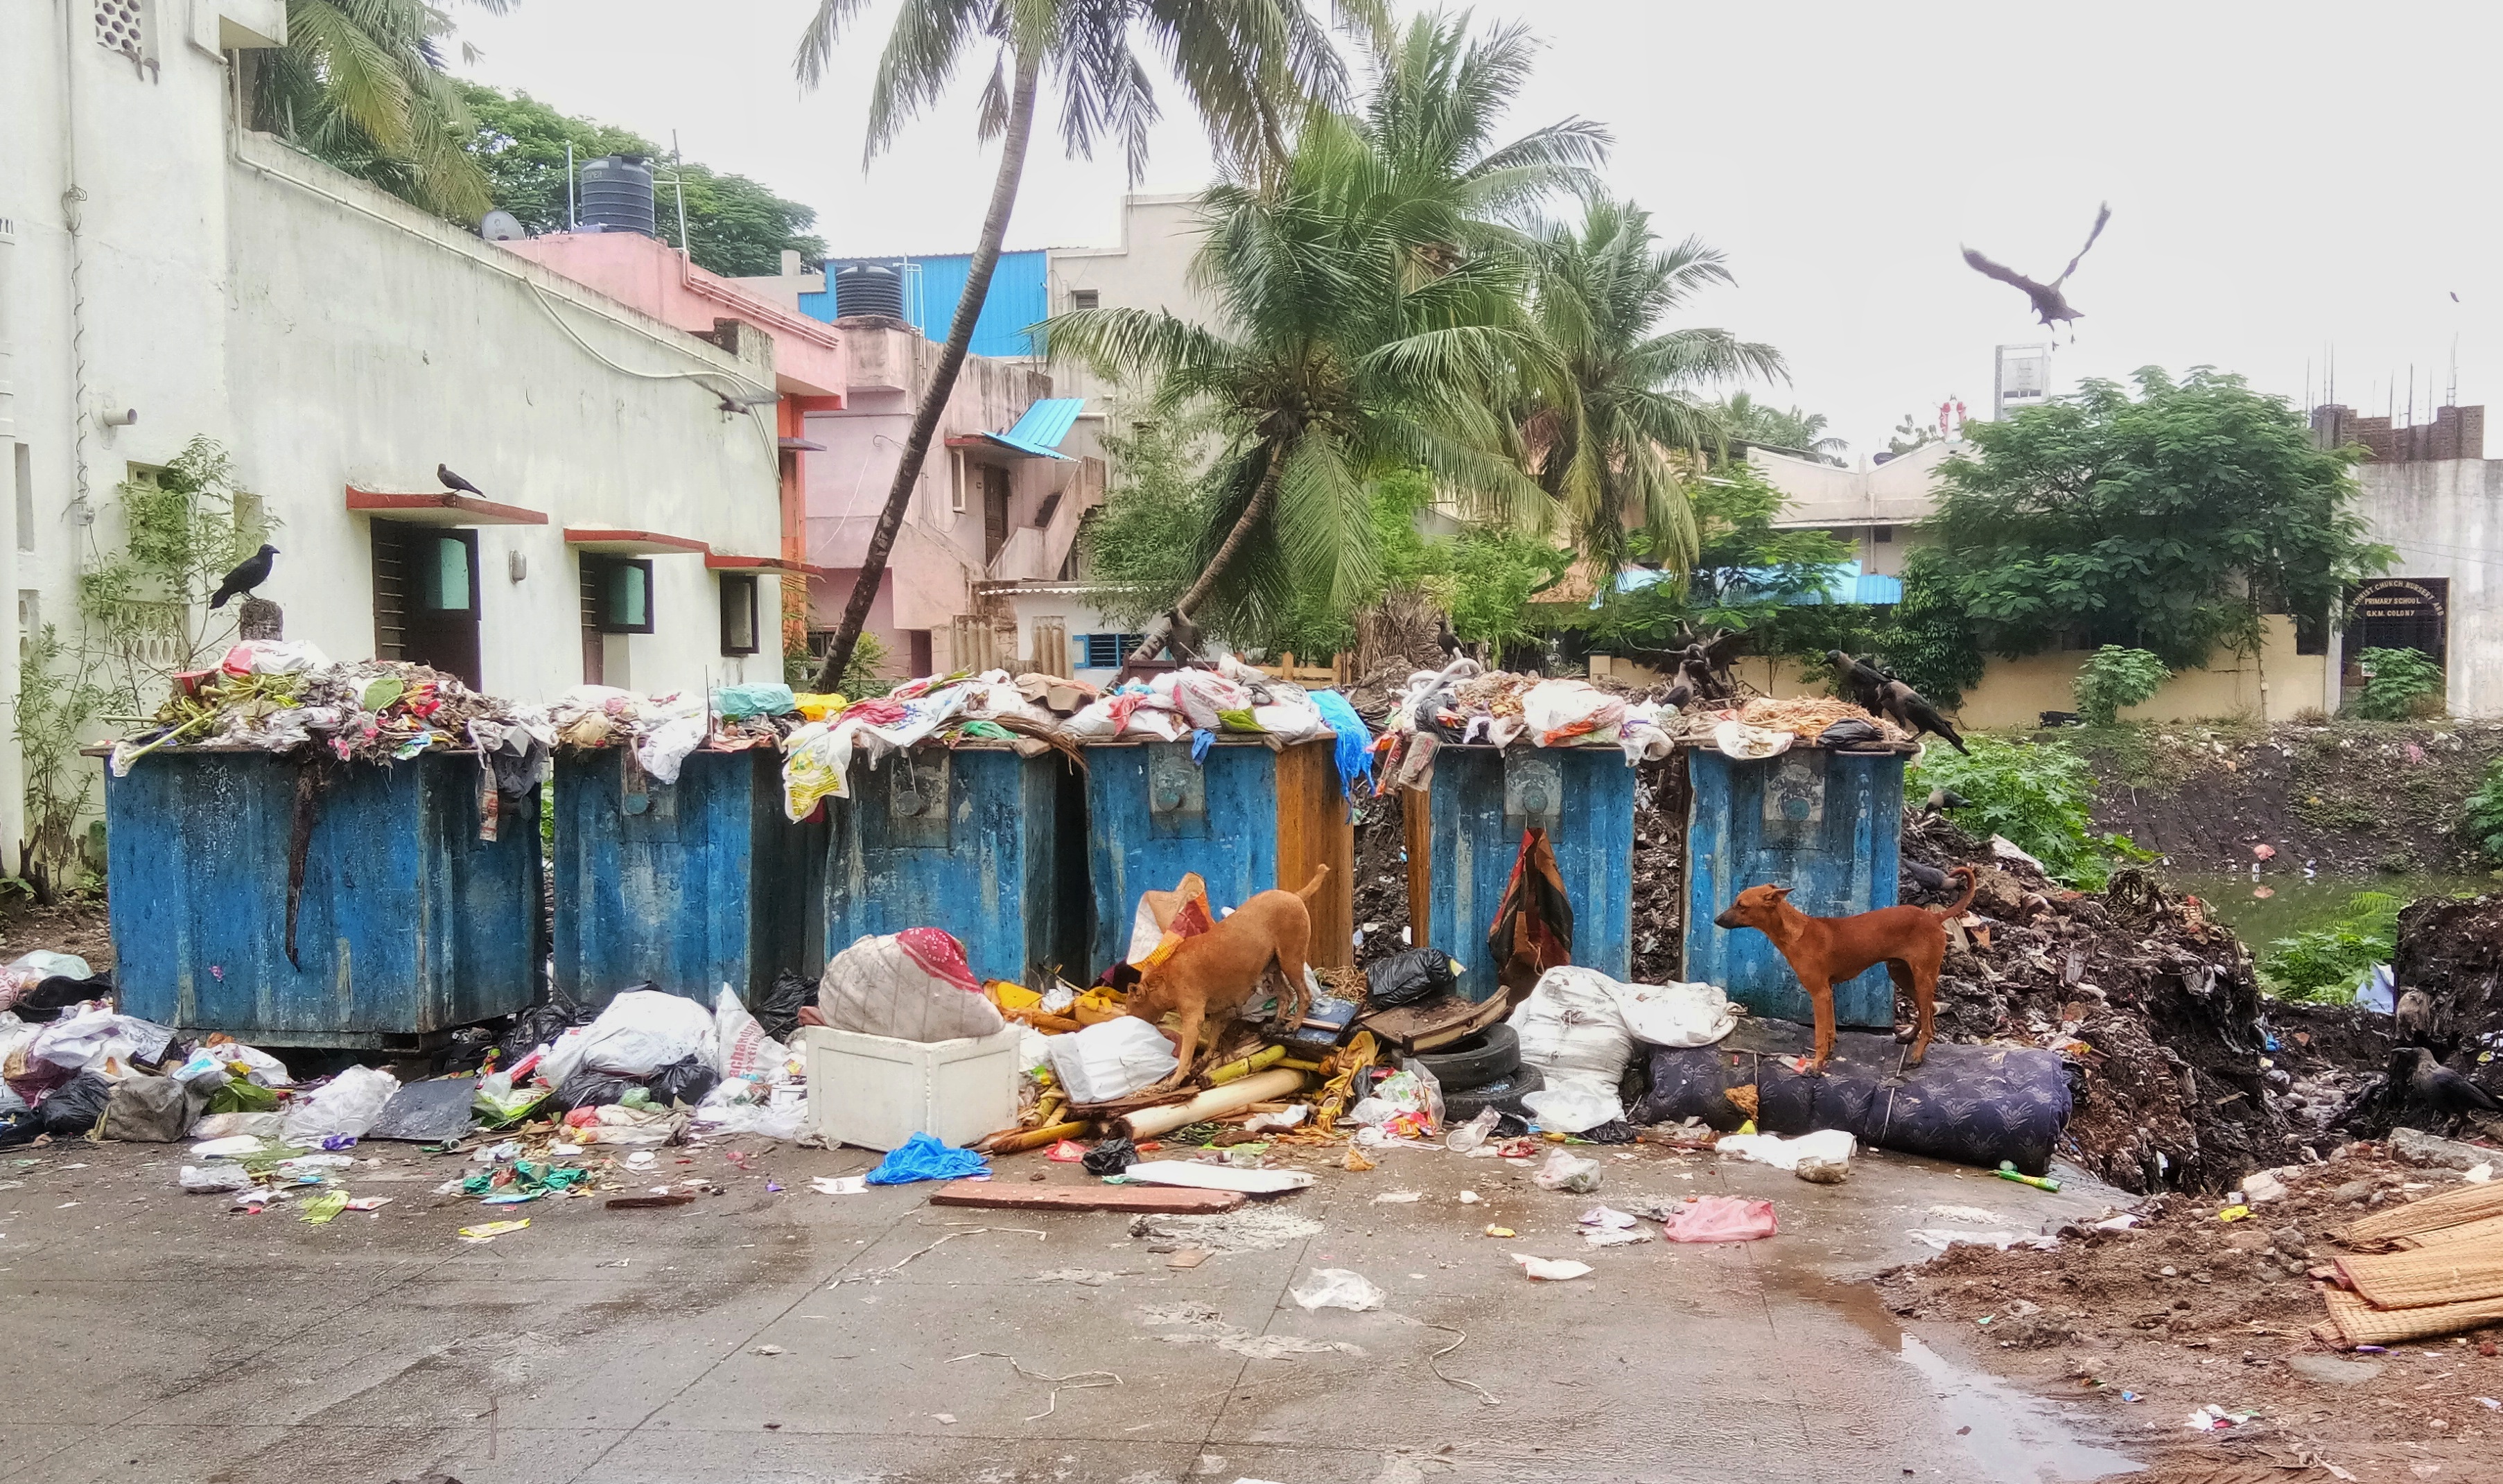 Secure facility to store collected garbage missing in most parts of the city